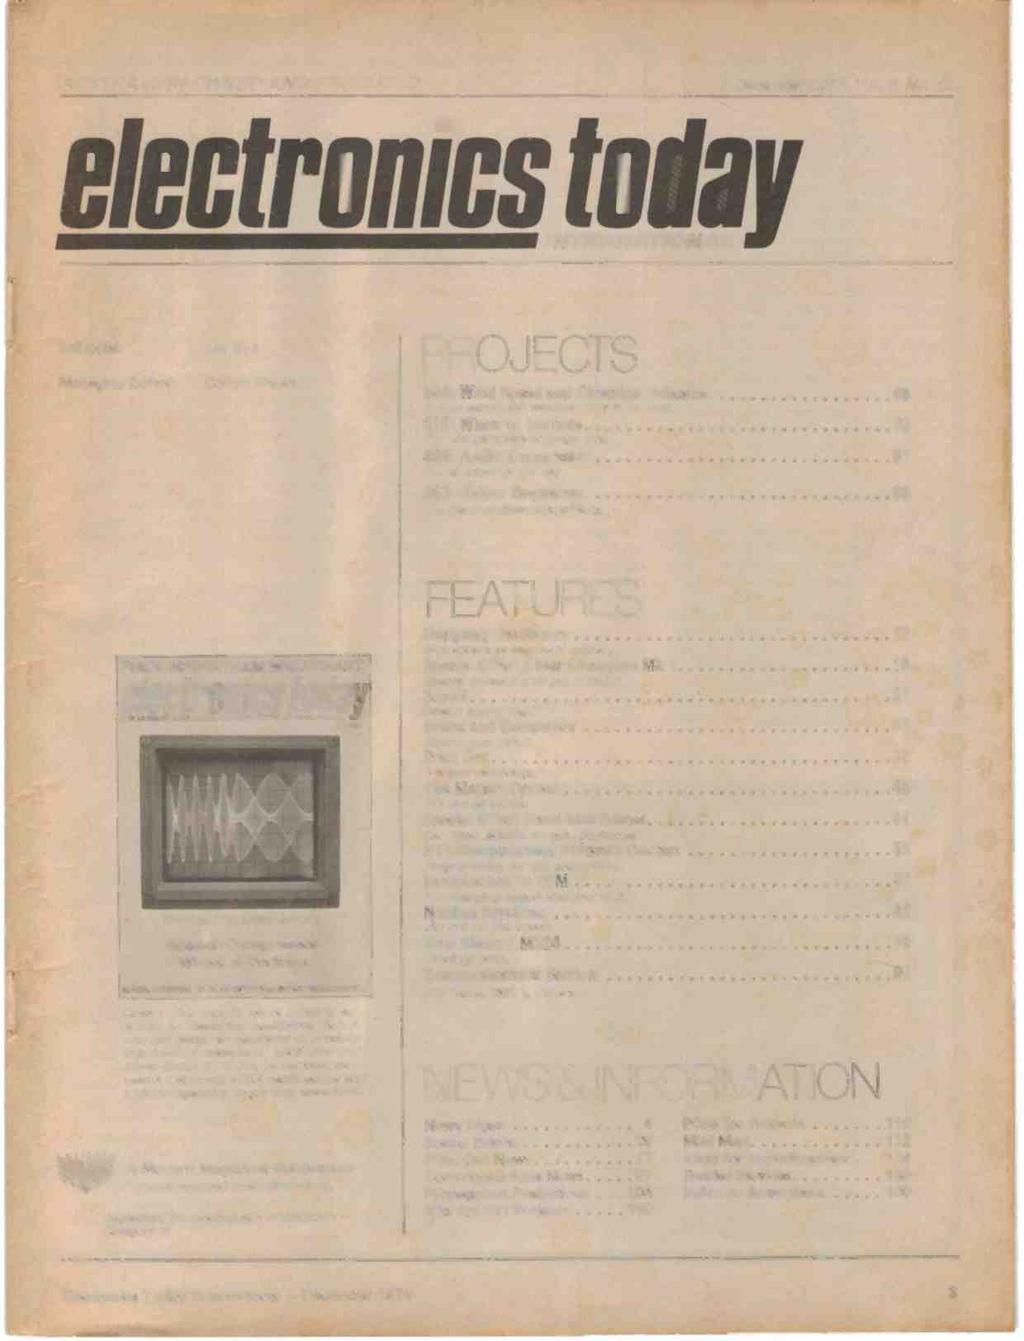 AUSTRALIAN OWNED AND PRODUCED December 1978, Vol. 8. No.